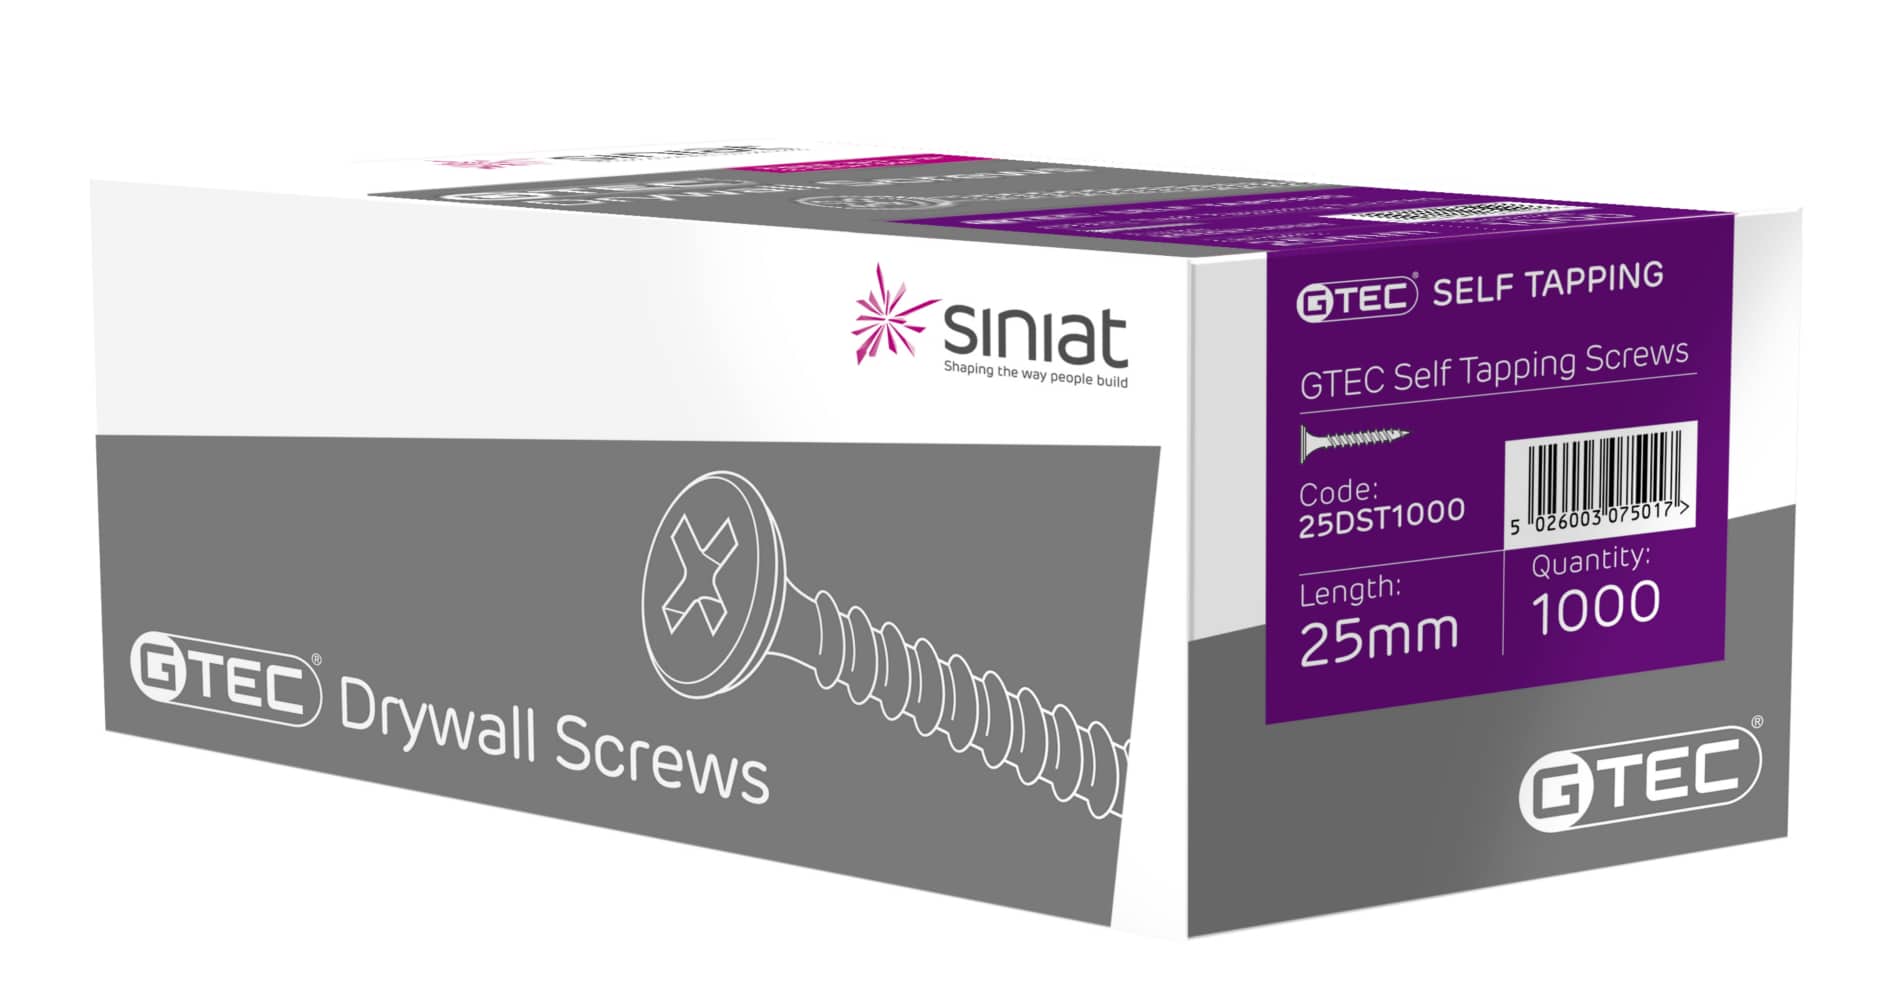 Siniat launches new range of drywall screws